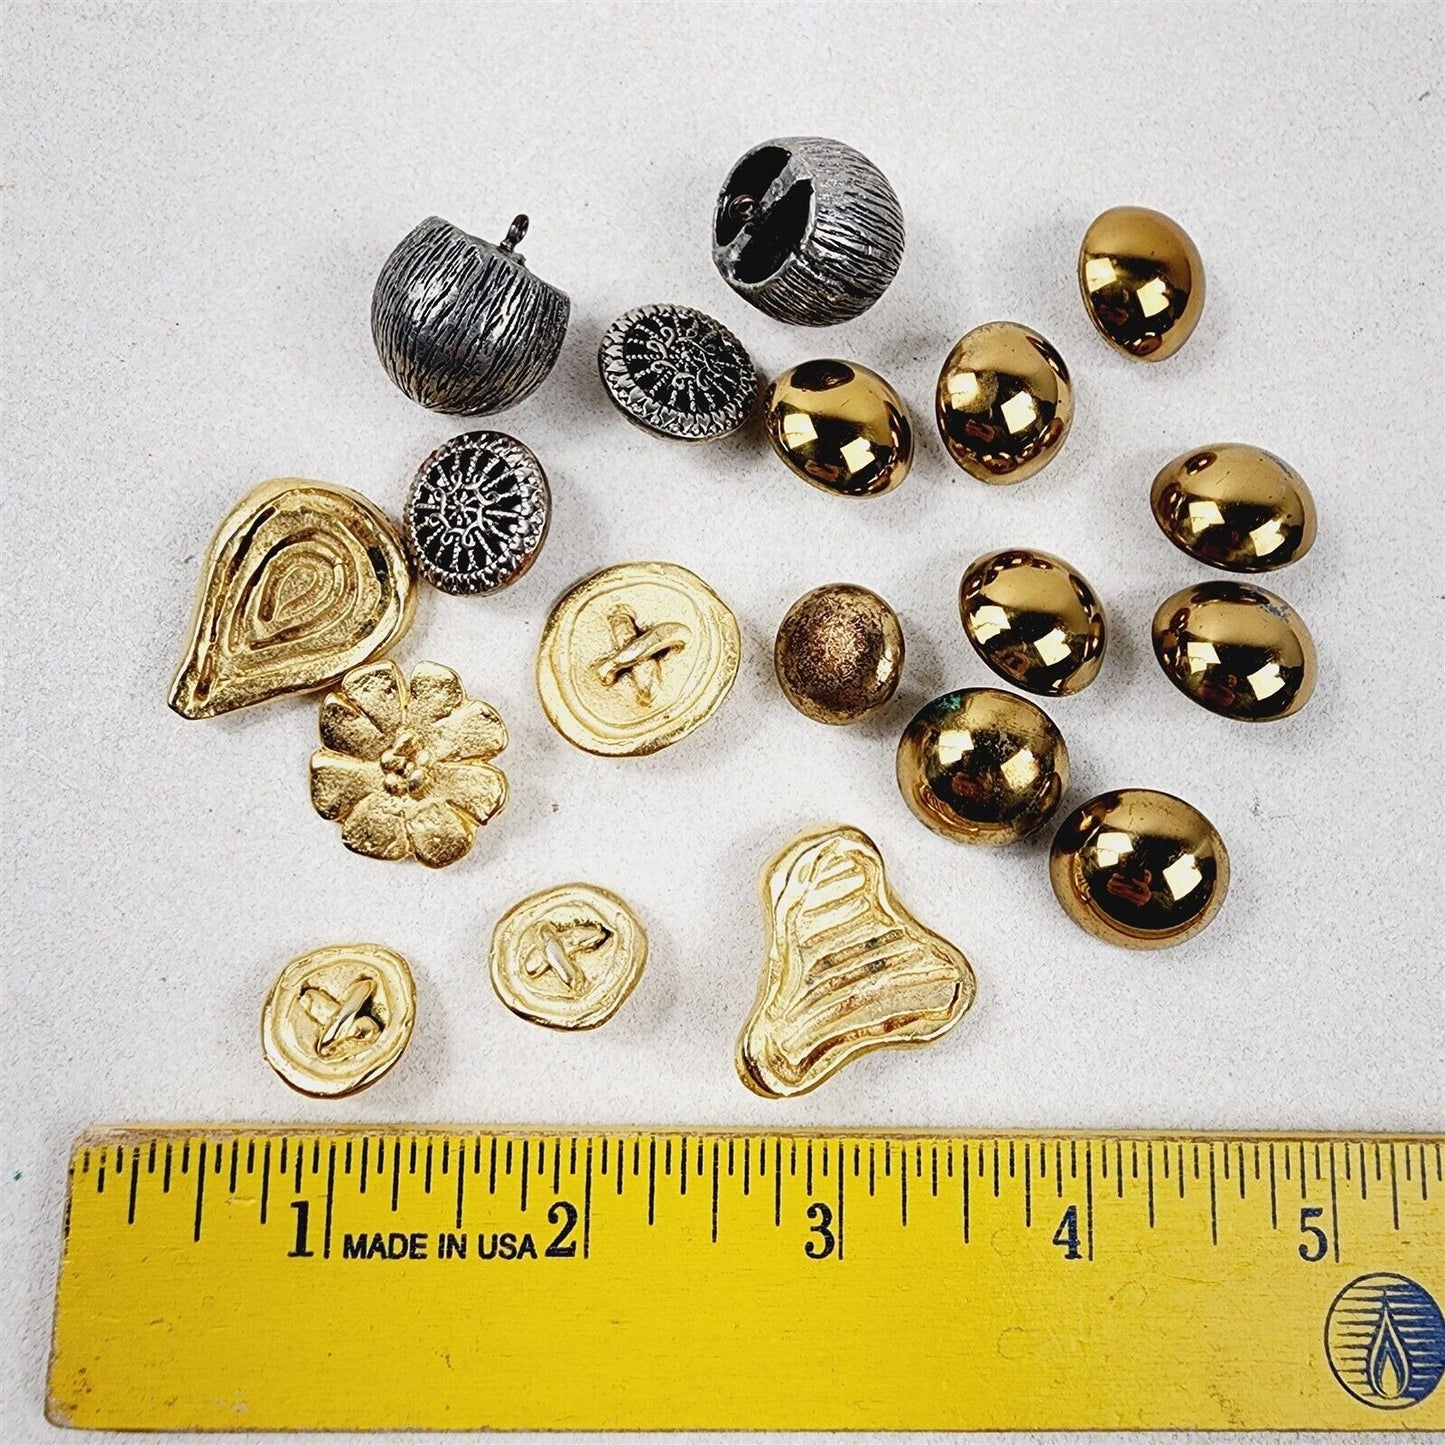 Lot of 19 Vintage Metal Buttons Brass Aluminum Gold & Silver Tone